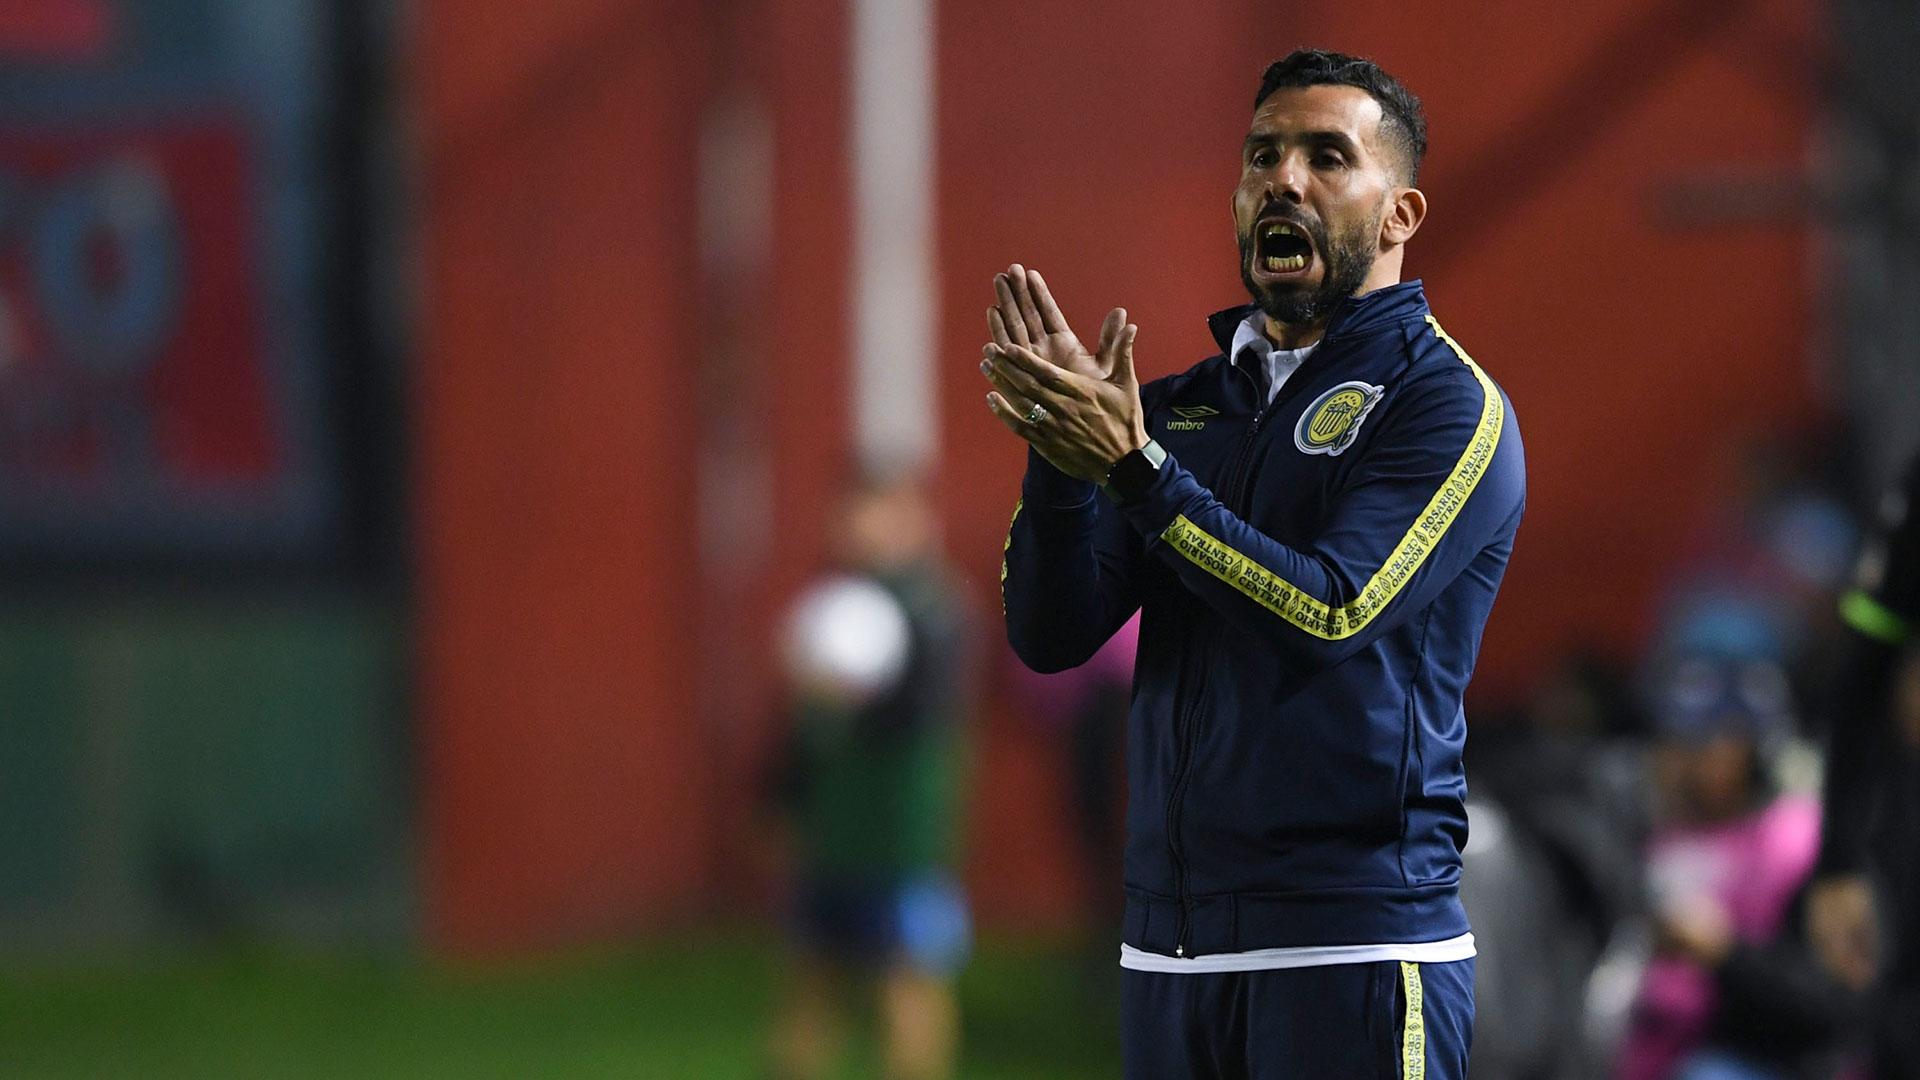 Carlos Tévez has no intention of returning to the world of soccer after leaving Rosario Central.